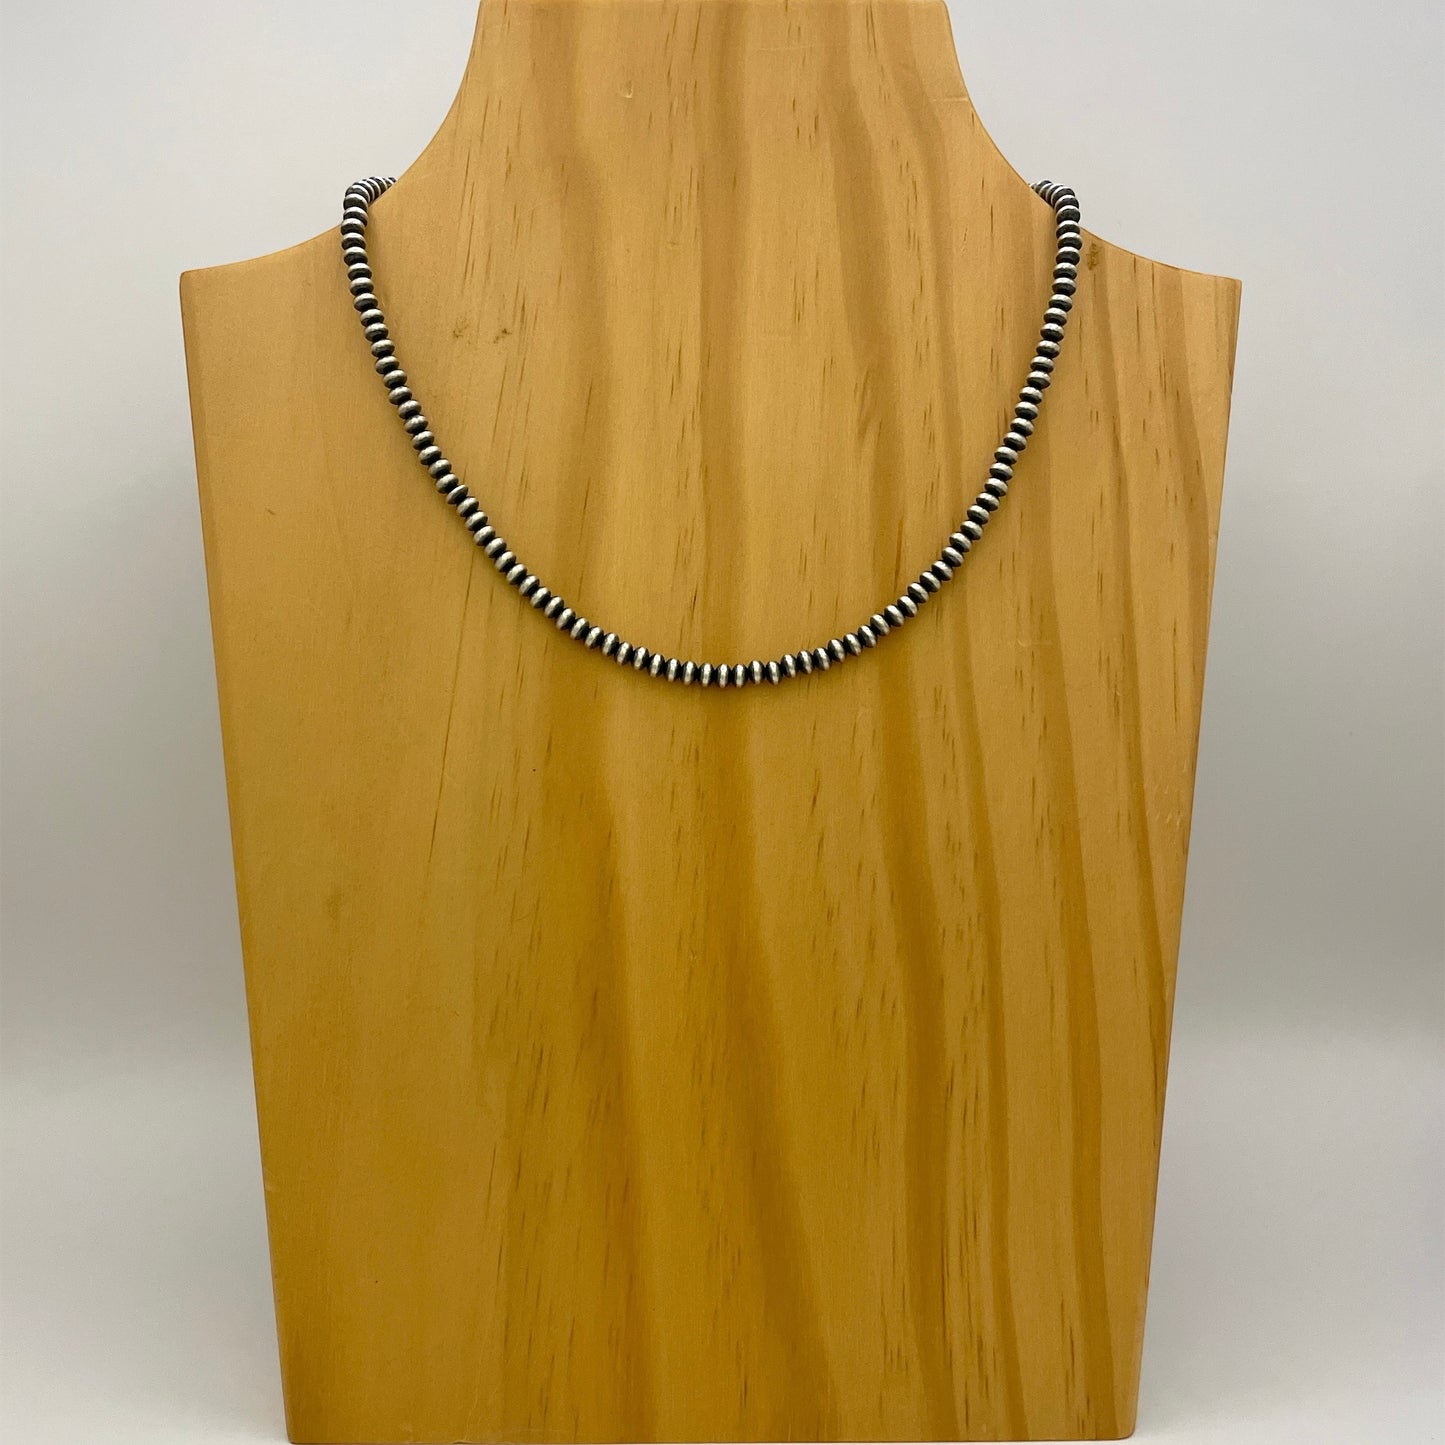 Saucer Navajo Pearls Necklace 4mm - 16"